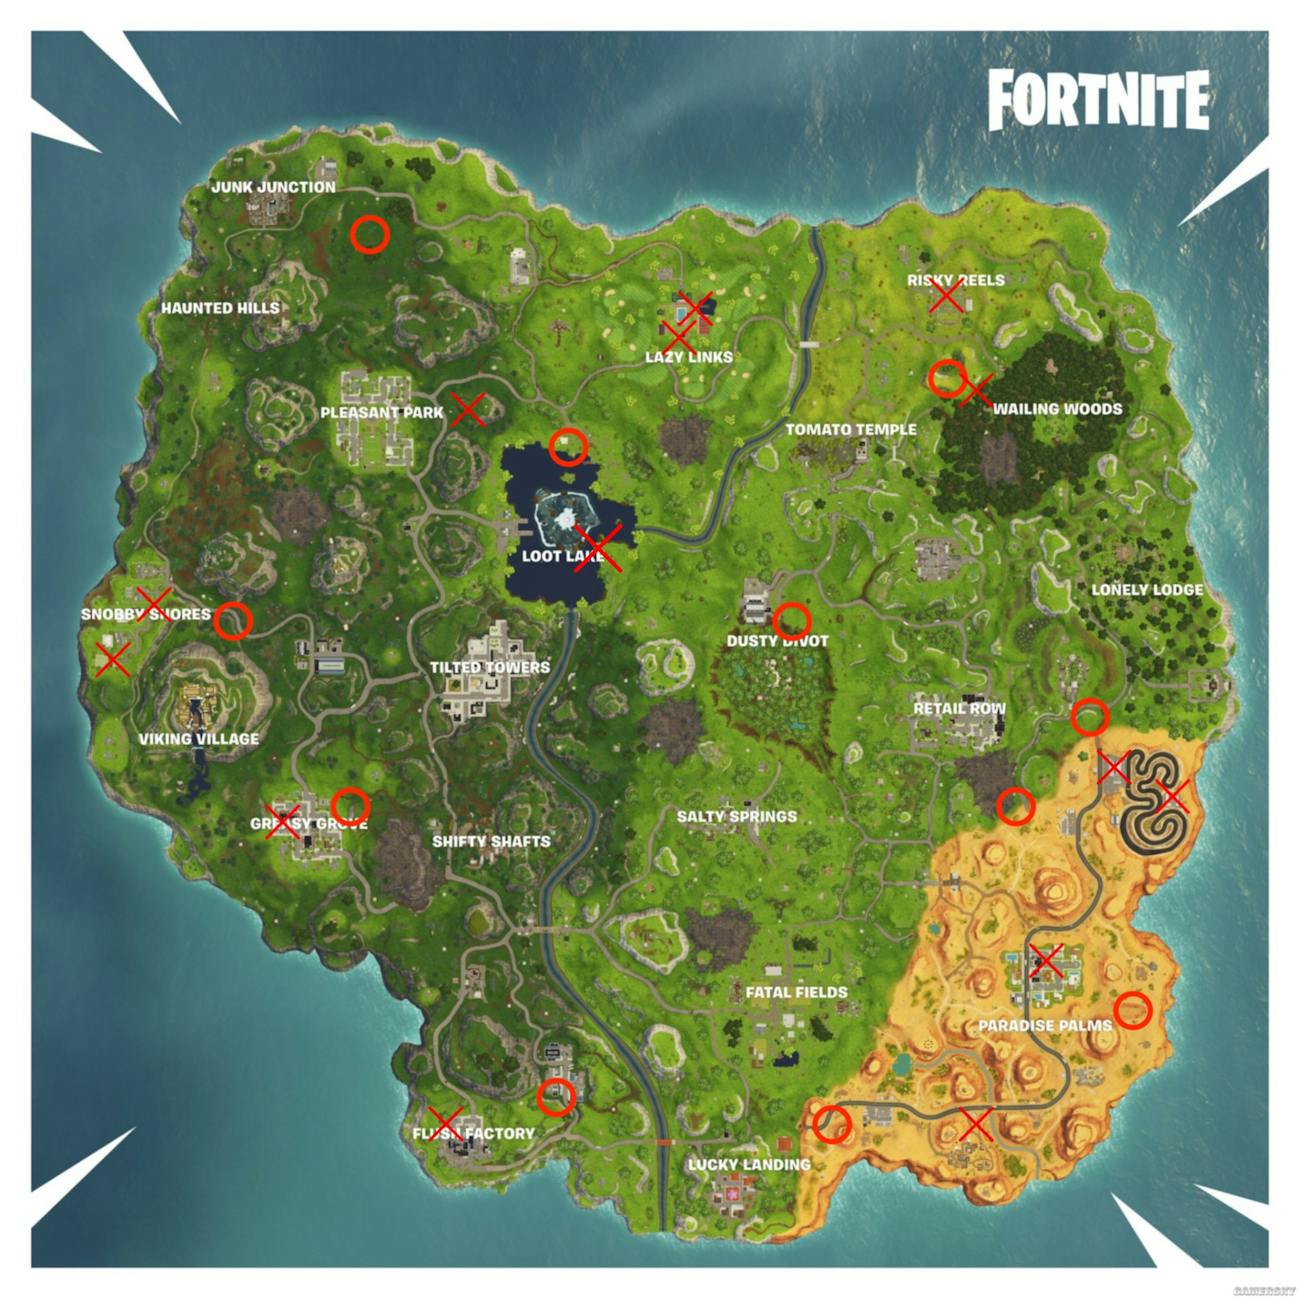 Fortnite Flaming Hoop Locations Map And Video Guide For Week 5 - fortnite flaming hoop atk and quadcrasher